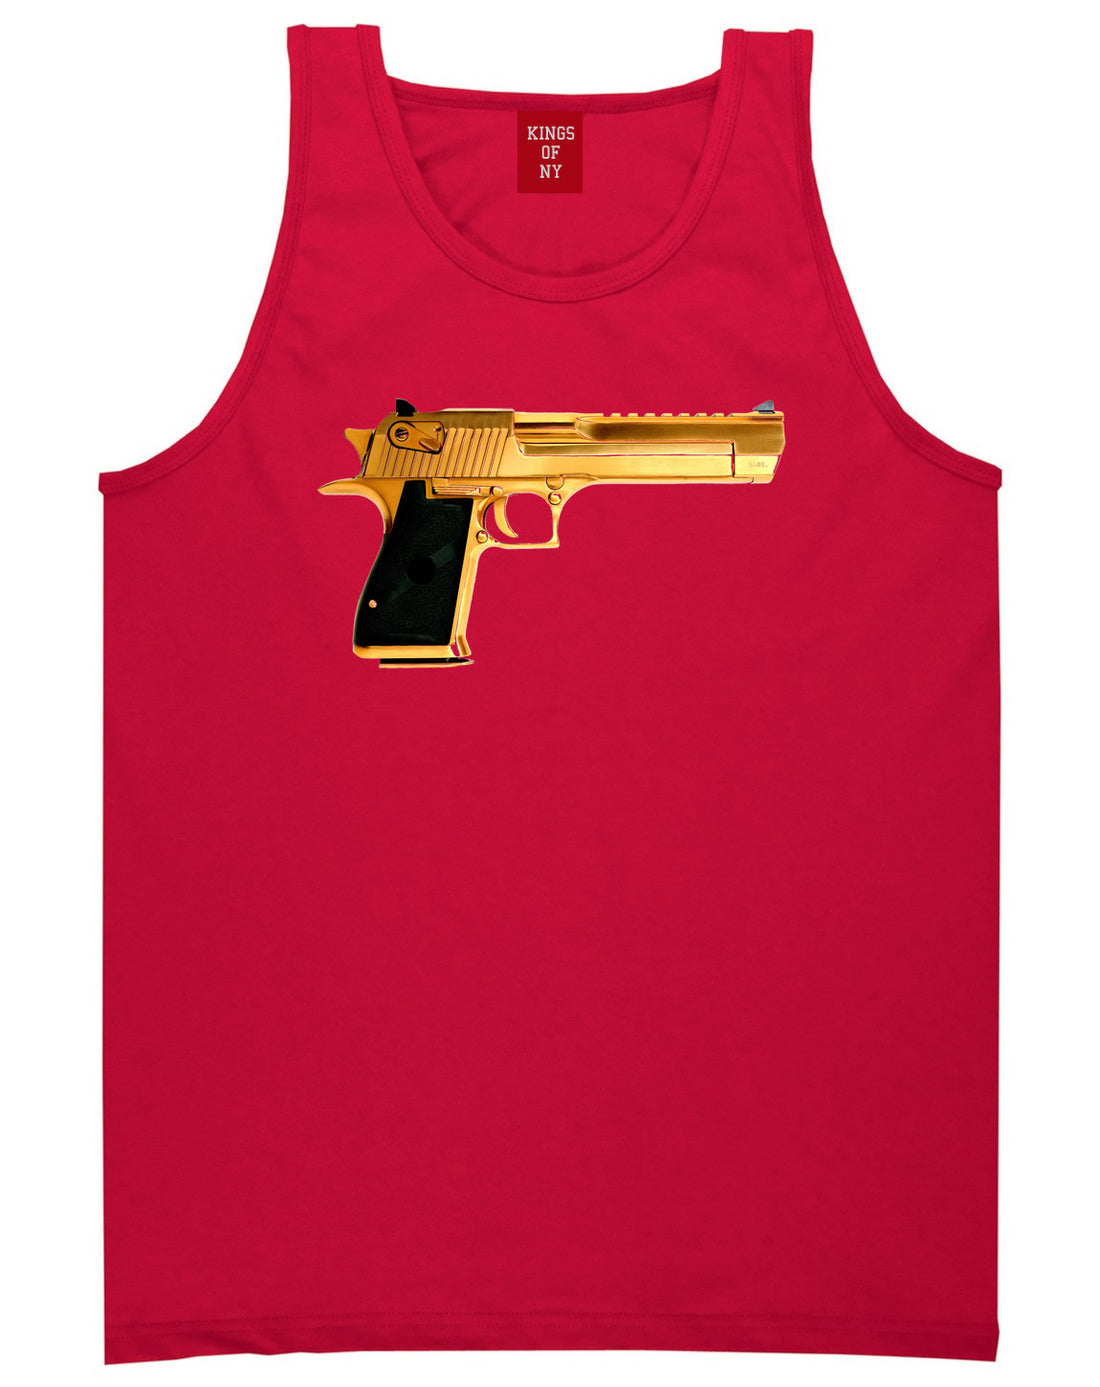 Gold Gun 9mm Revolver Chrome 45 Tank Top In Red by Kings Of NY